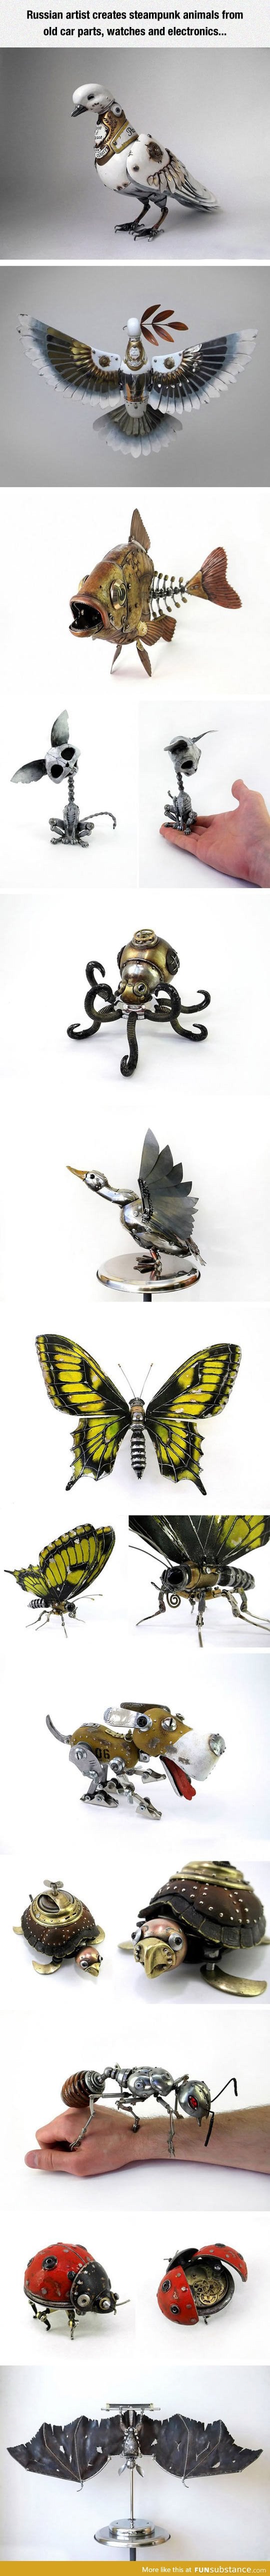 Steampunk animals made from old car parts